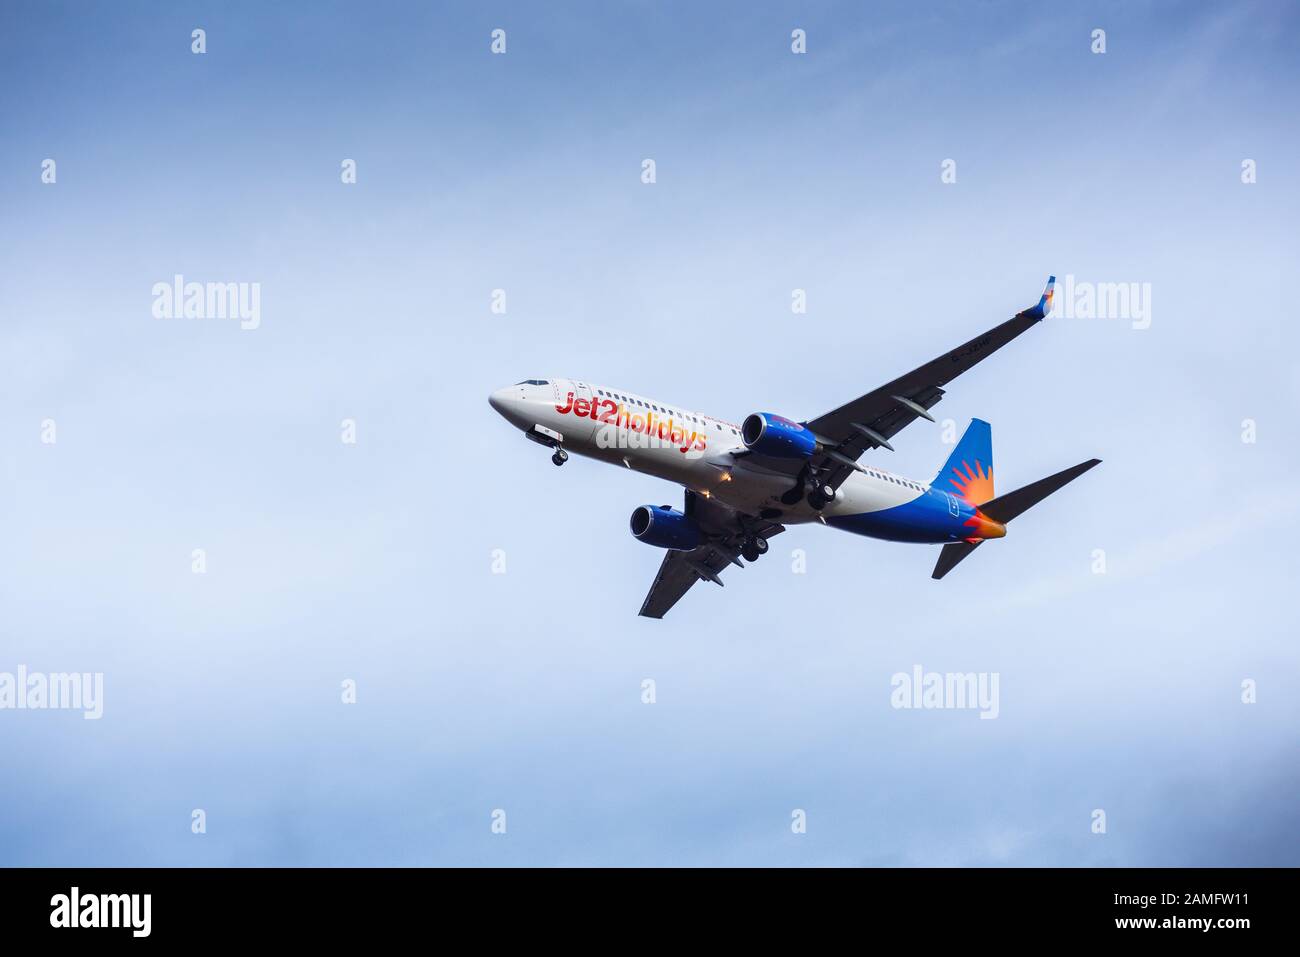 Jet 2 Holidays Airliner Approaching East Midlands Airport,UK. Stock Photo